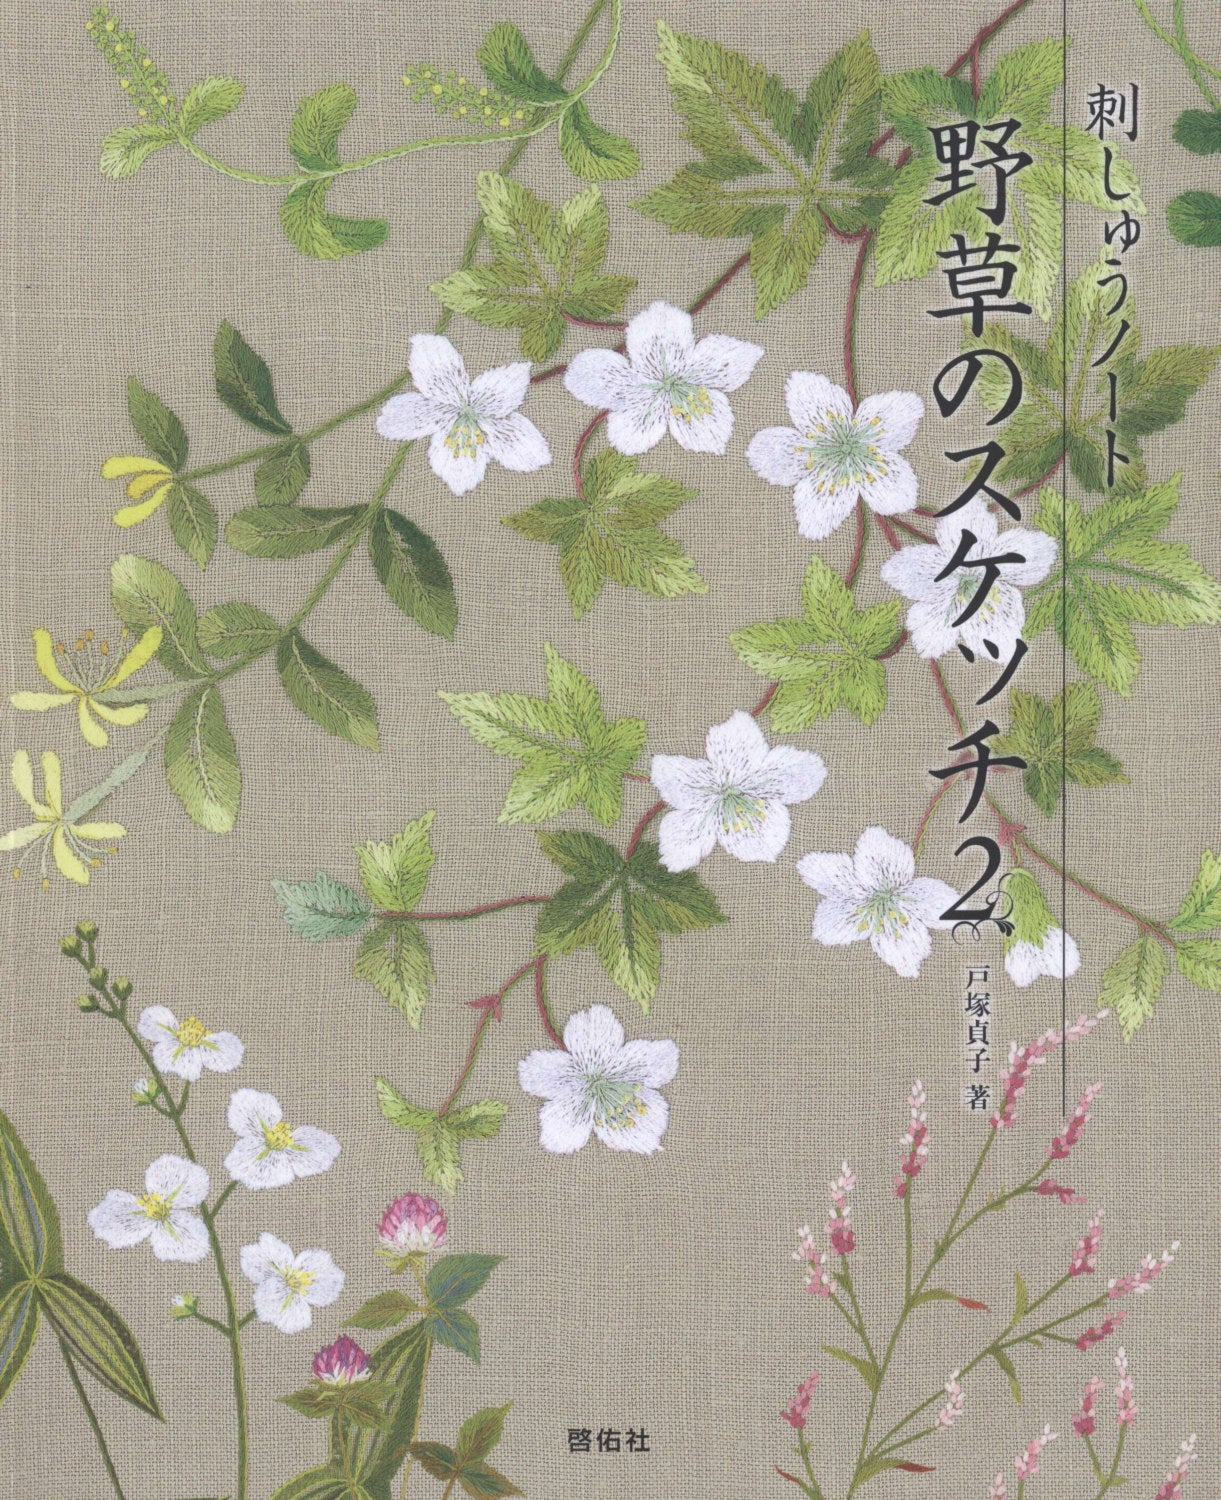 Embroidery Patterns Flowers 59 Embroidery Patterns Flower Embroidery Embroidery Pattern Botanical Japanese Embroidery Book Ebook Pdf Instant Download